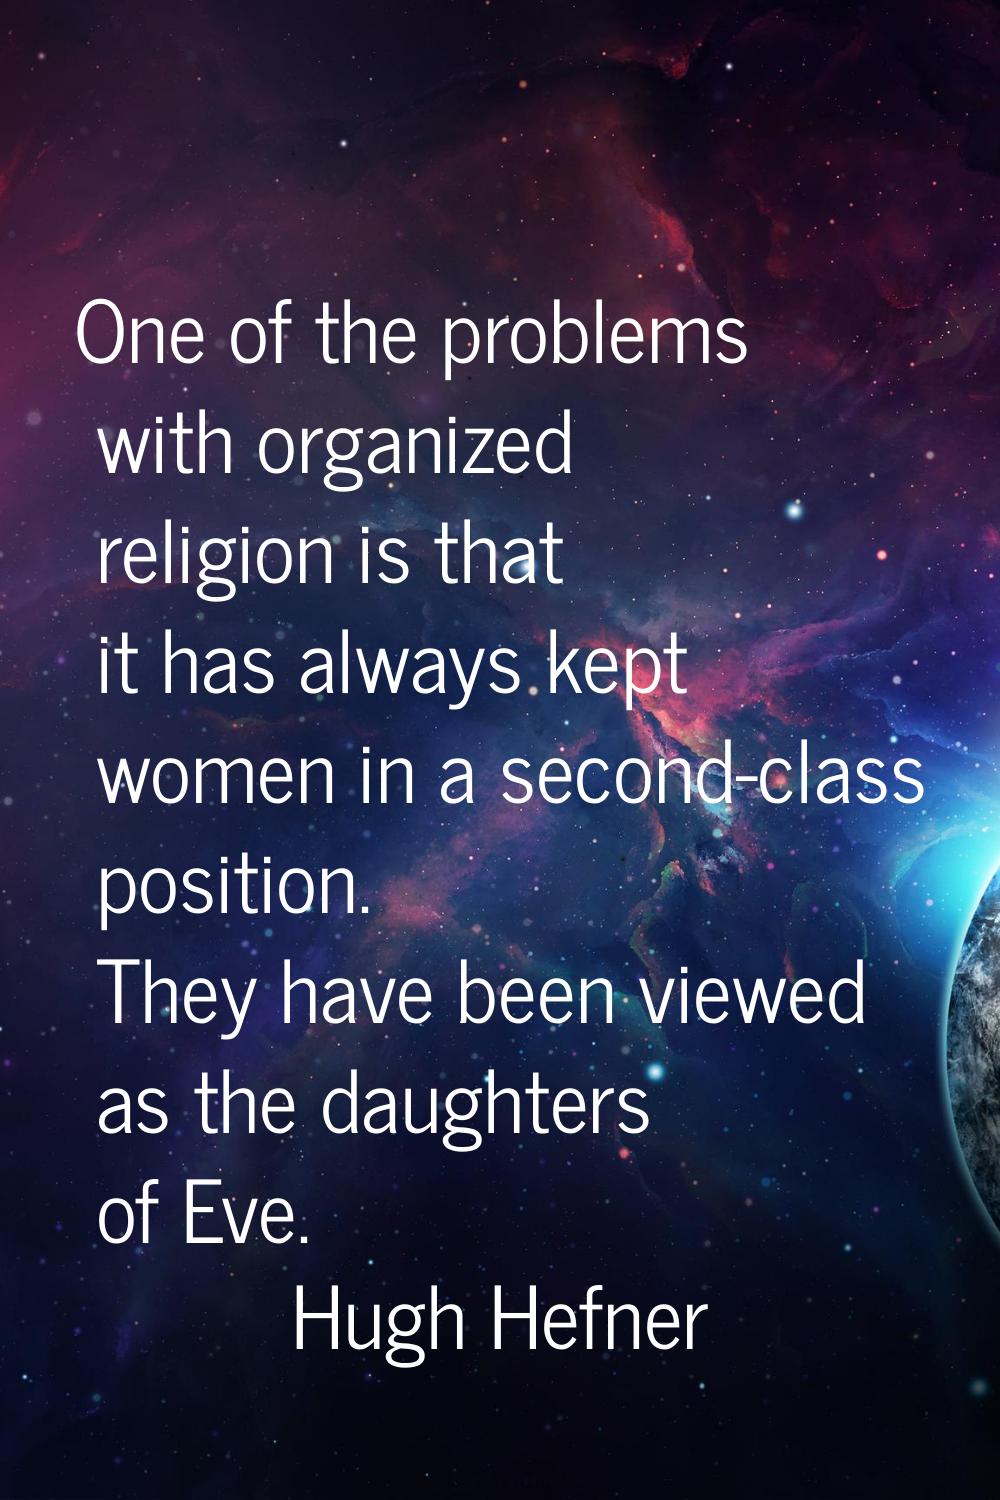 One of the problems with organized religion is that it has always kept women in a second-class posi